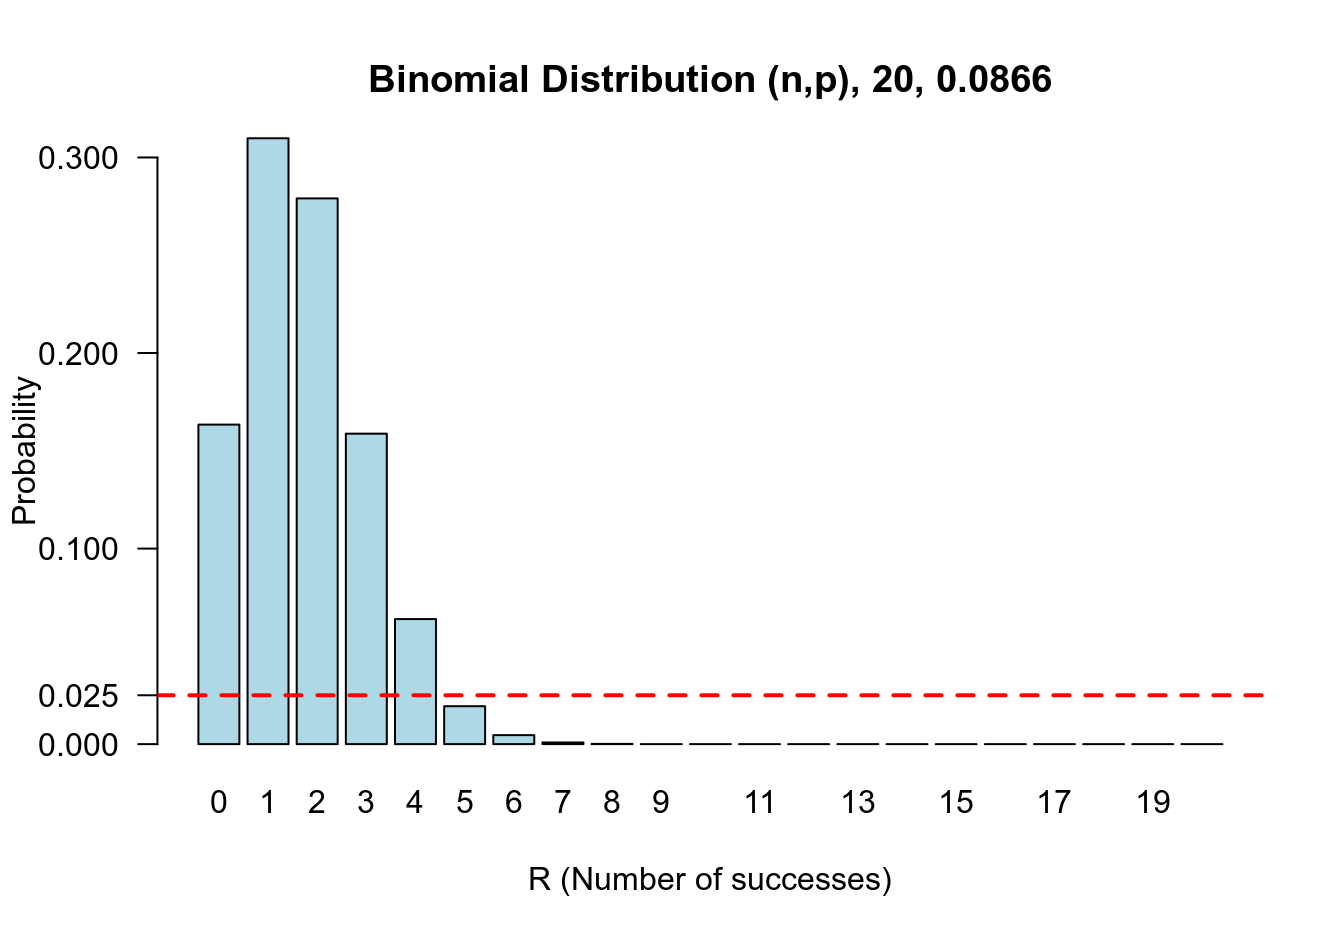 Sampling distribution of number of successes out of 20 (R) conditional on the probability of success being 0.0866